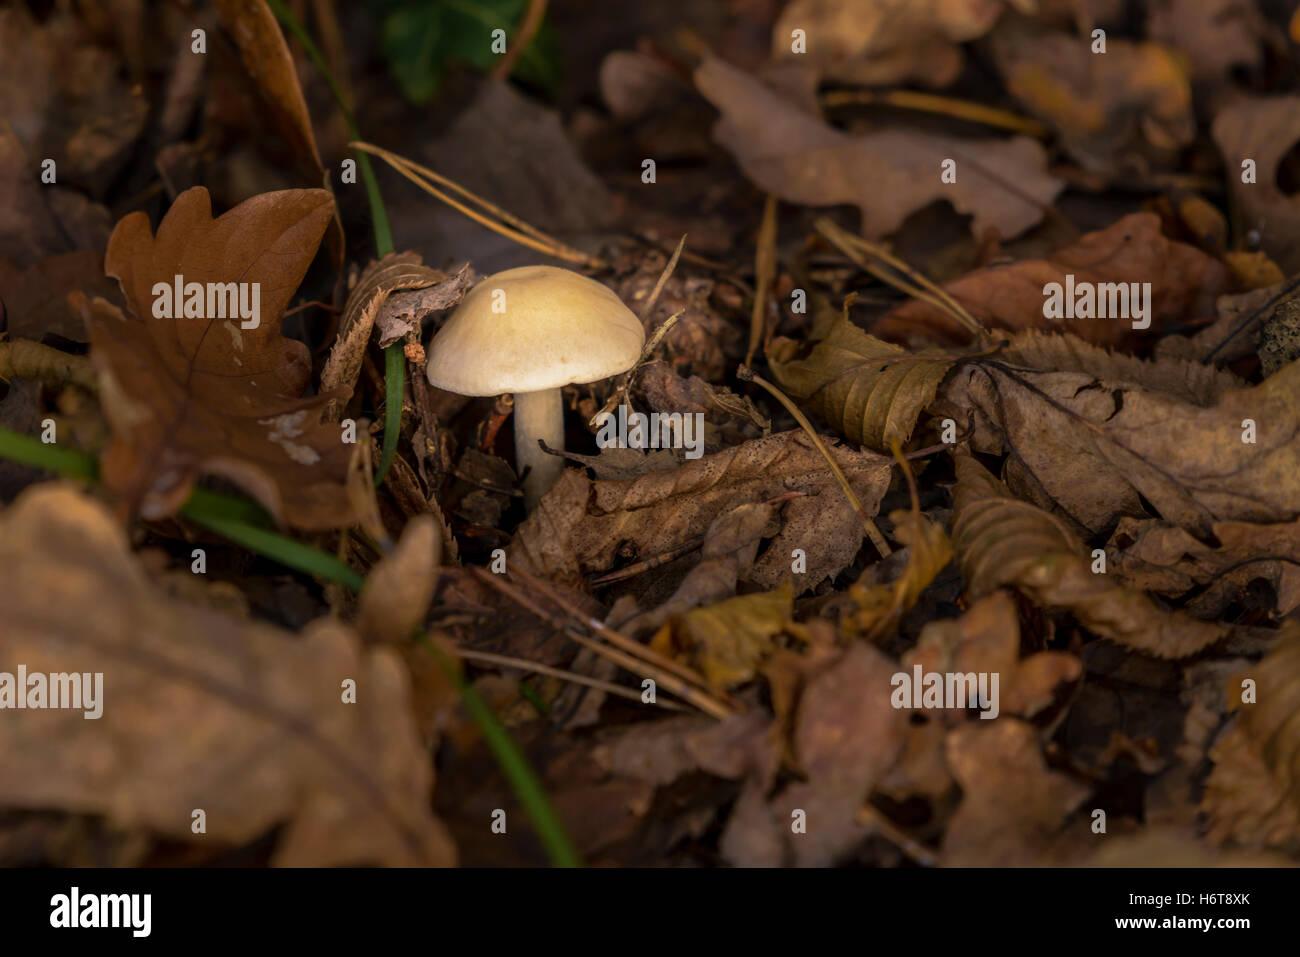 Mushroom in woods in autumn foliage on forest ground Stock Photo